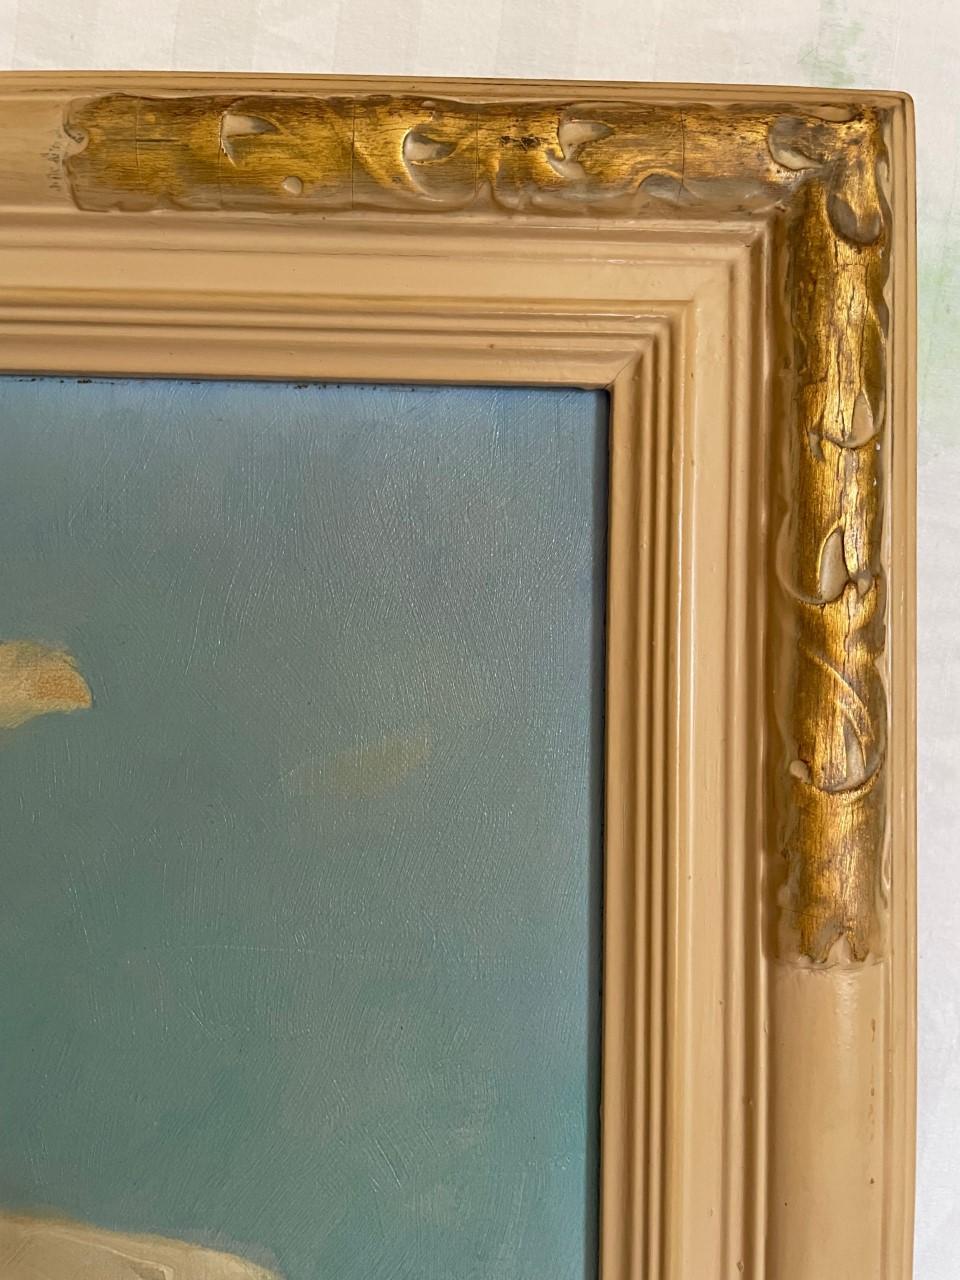 American Impressionist Painting Signed E. T. Grigware, Newcomb Macklin Frame In Good Condition For Sale In Vero Beach, FL